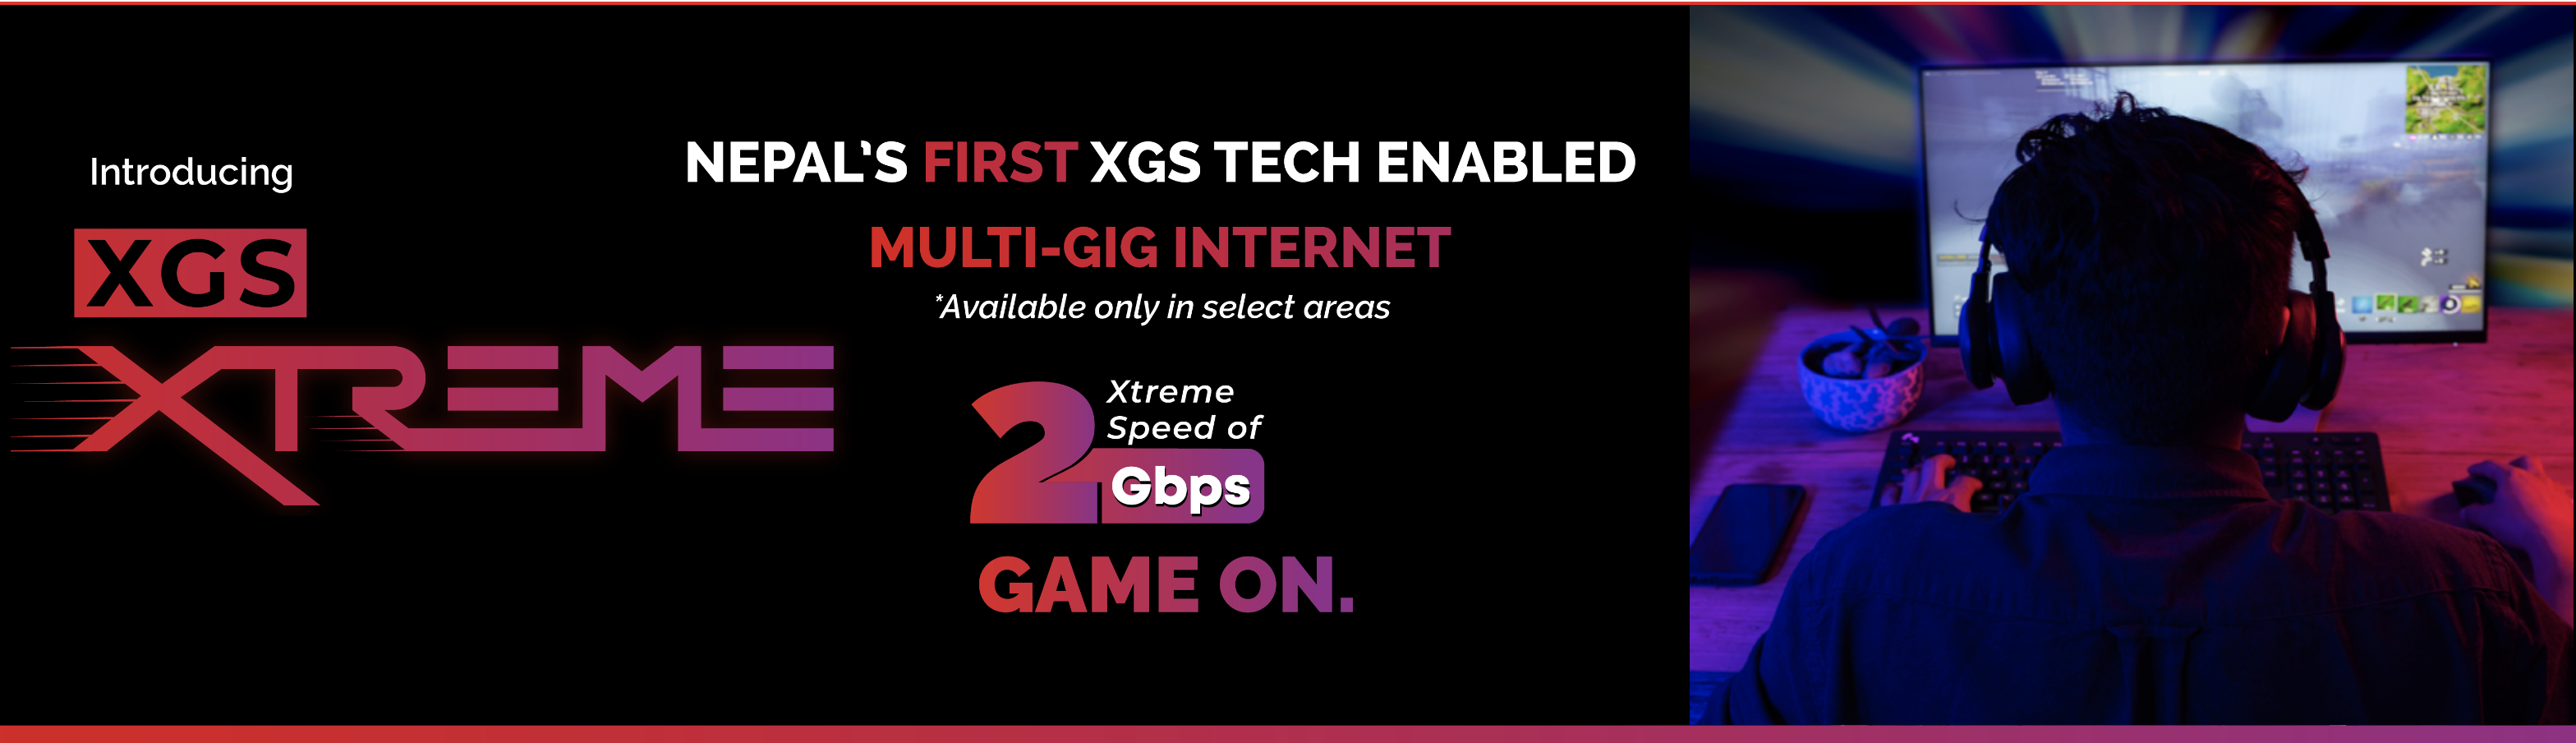 XGS0-Extreme-Multi-Gig-Internet-connection-XGS-Technology